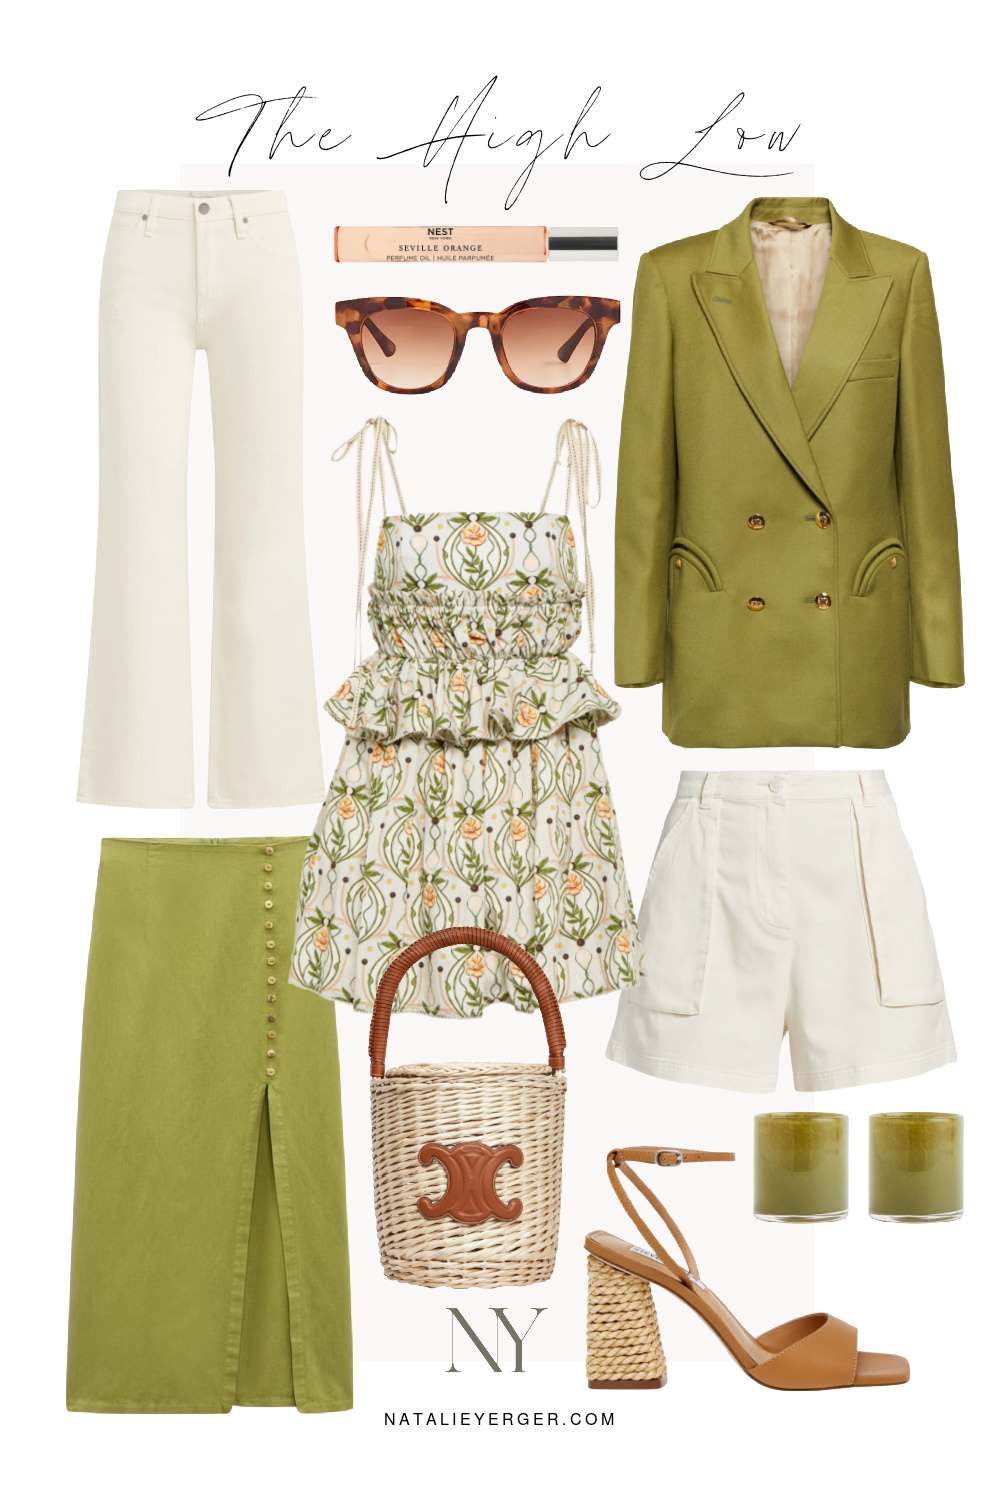 green and white summer dress outfit inspiration